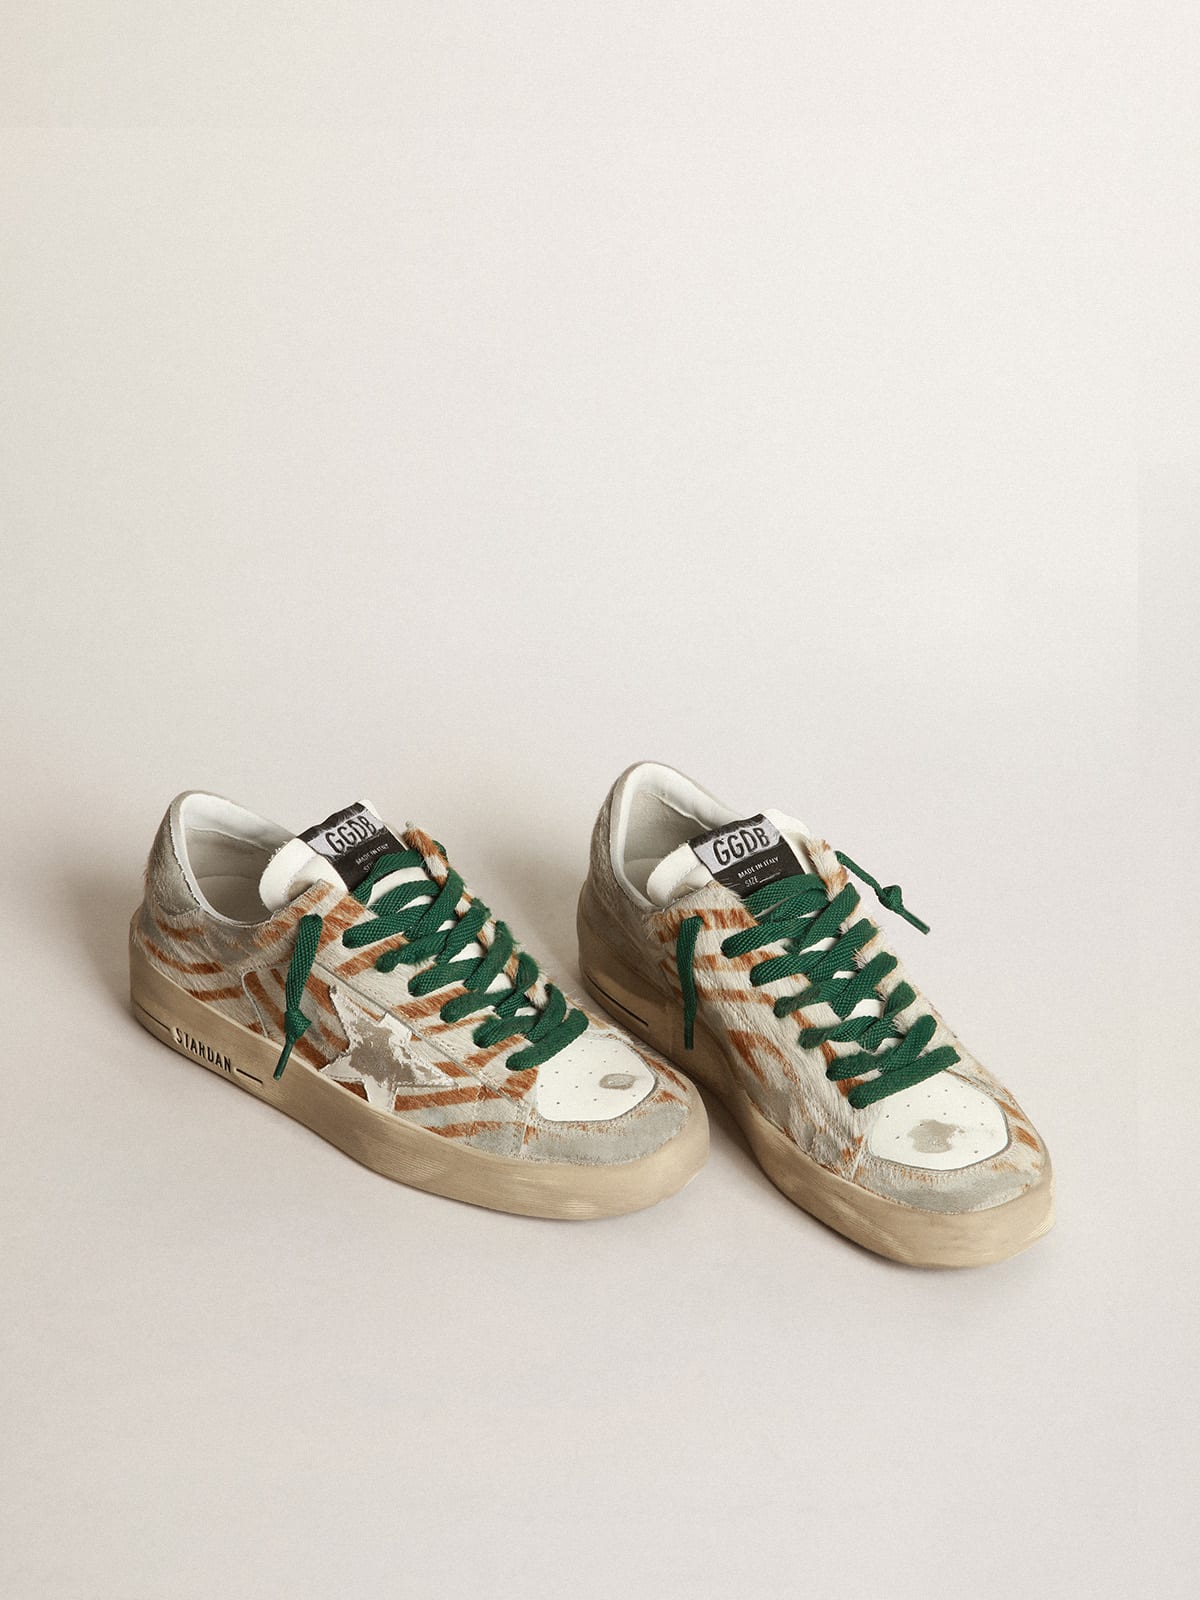 Golden Goose - Stardan LTD sneakers in gray and brown zebra-print pony skin with glossy white leather star and light gray suede heel tab in 